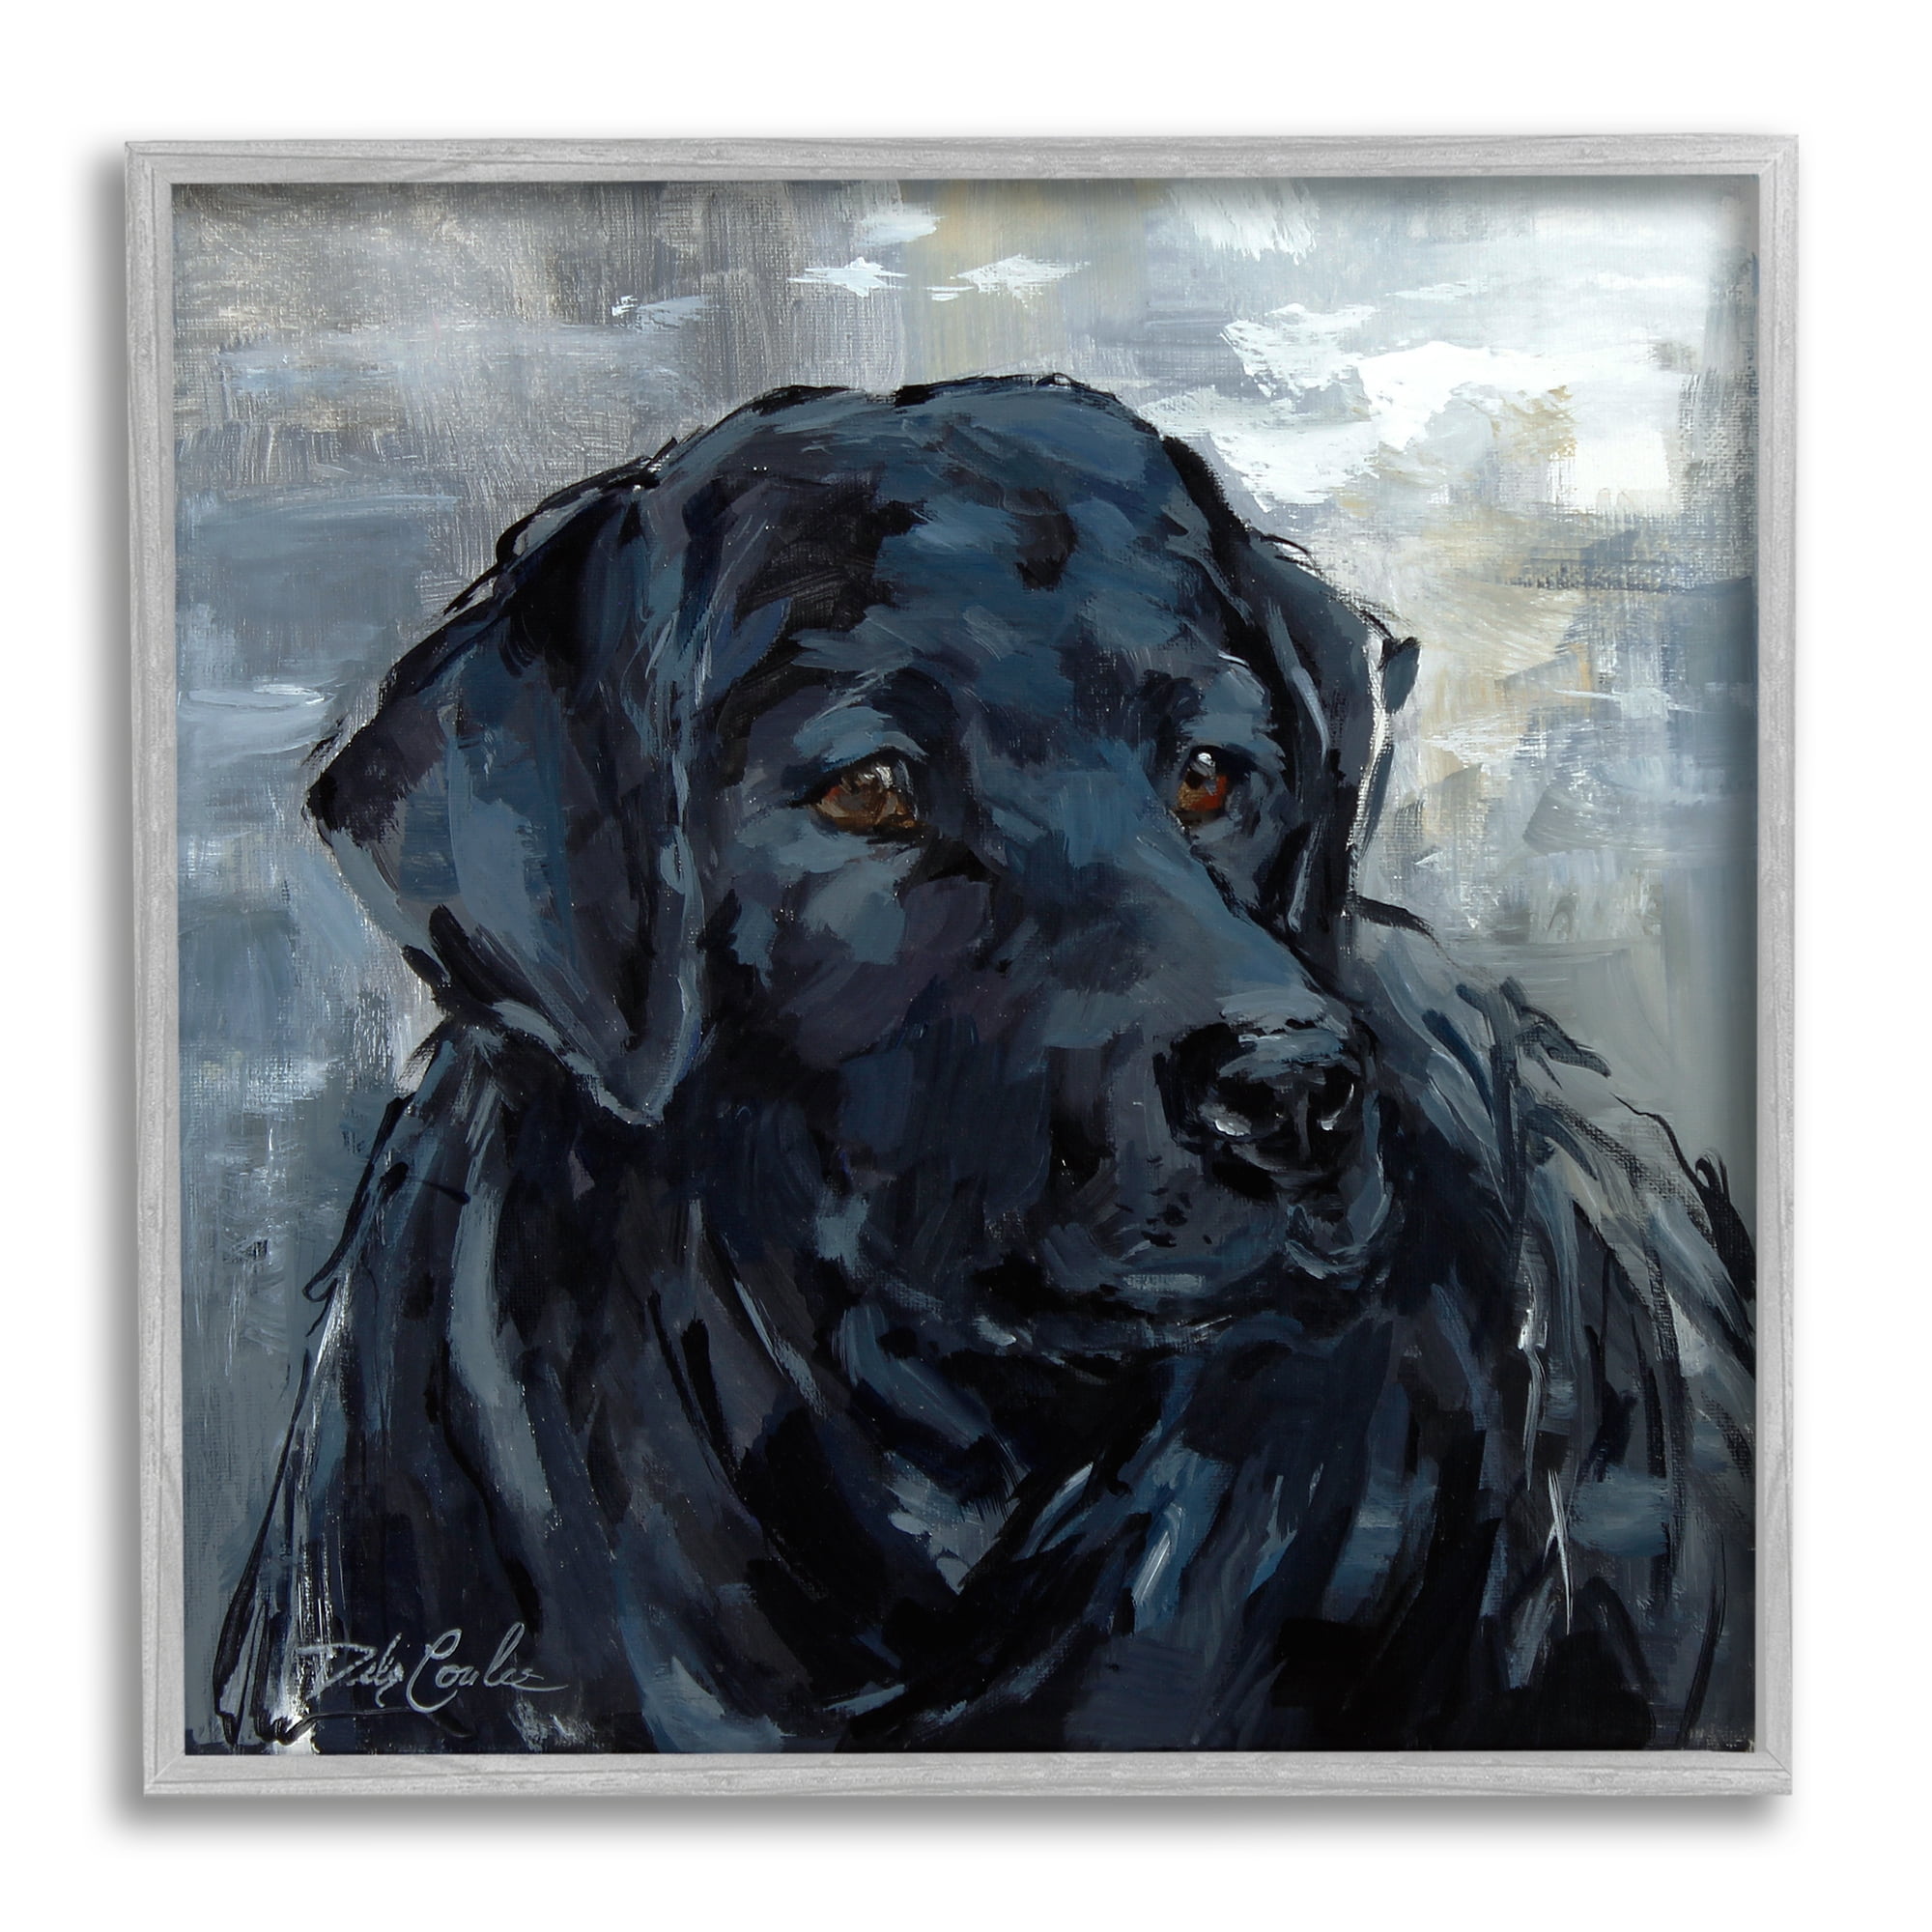 Stupell Resting Labrador Dog Pencil Sketch Gallery Wrapped Canvas Wall Art,  24 x 30